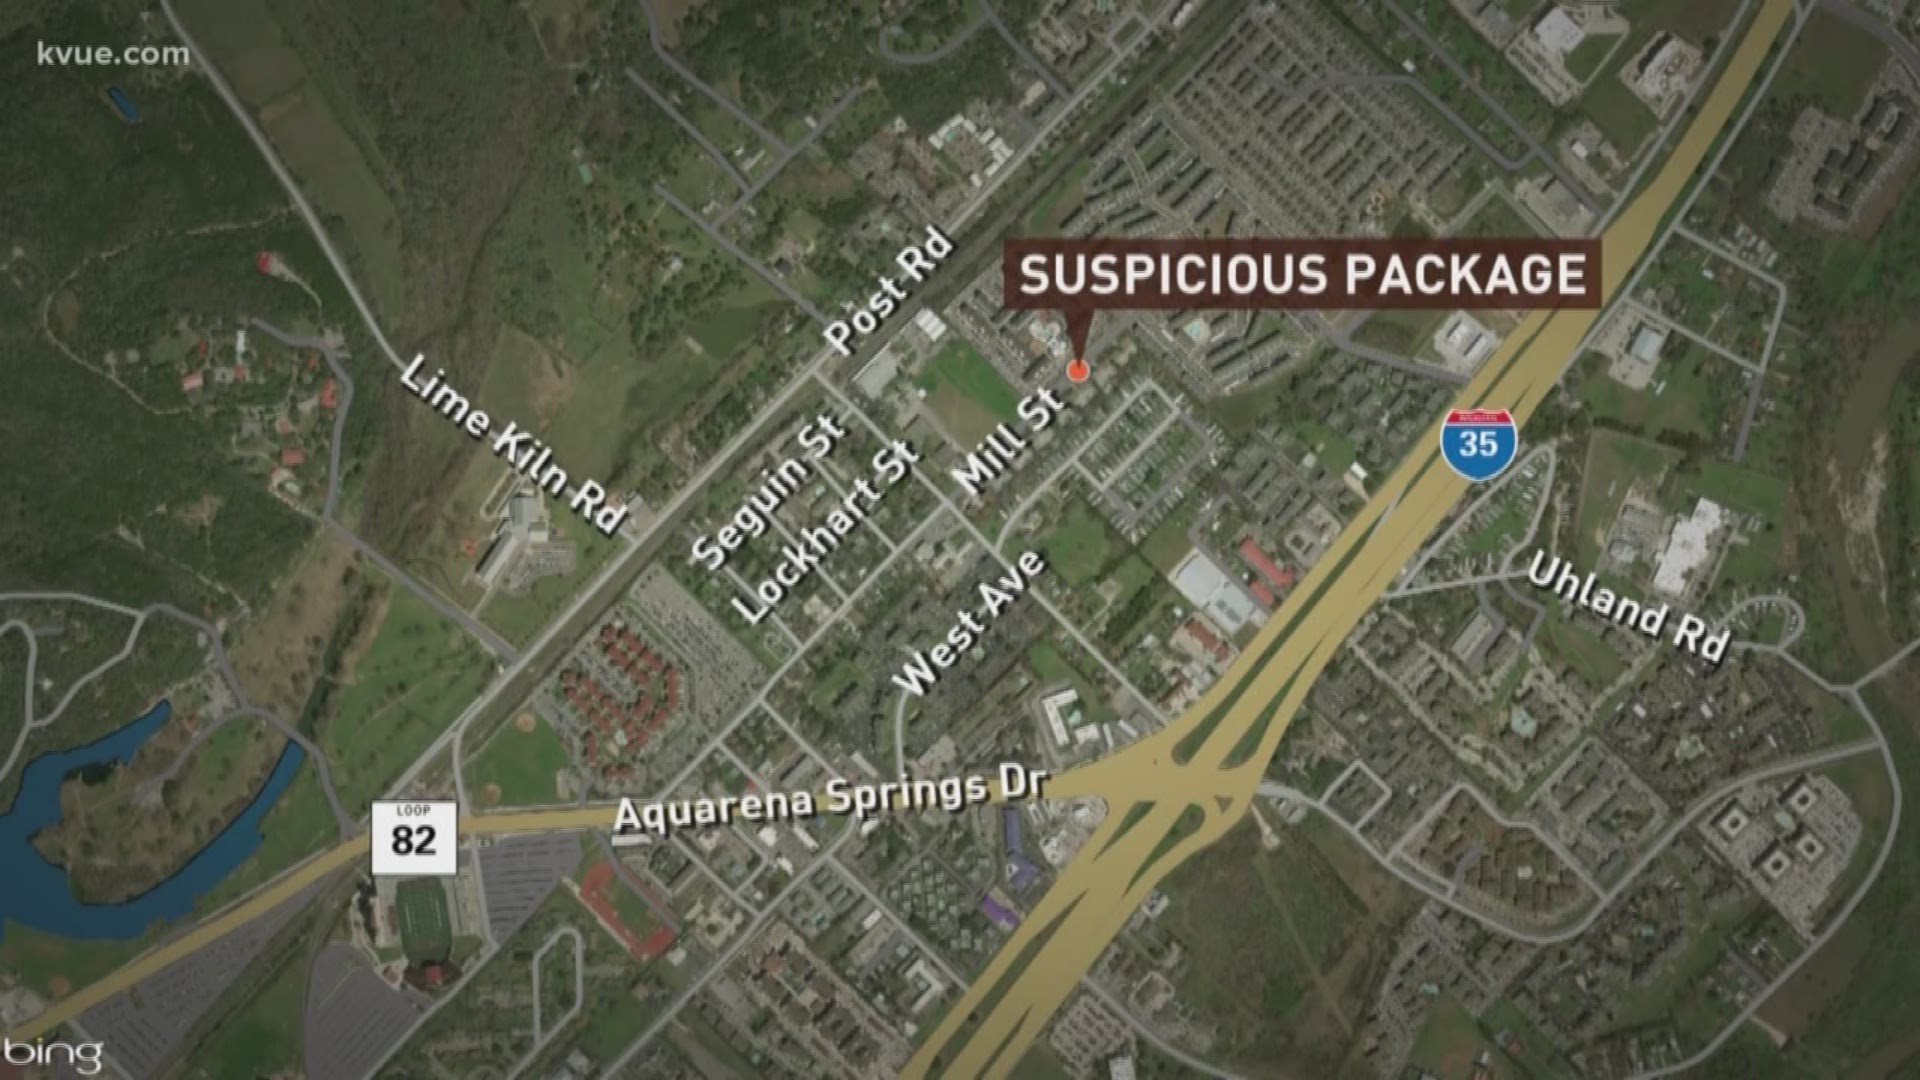 A suspicious package was reported Monday night in San Marcos.